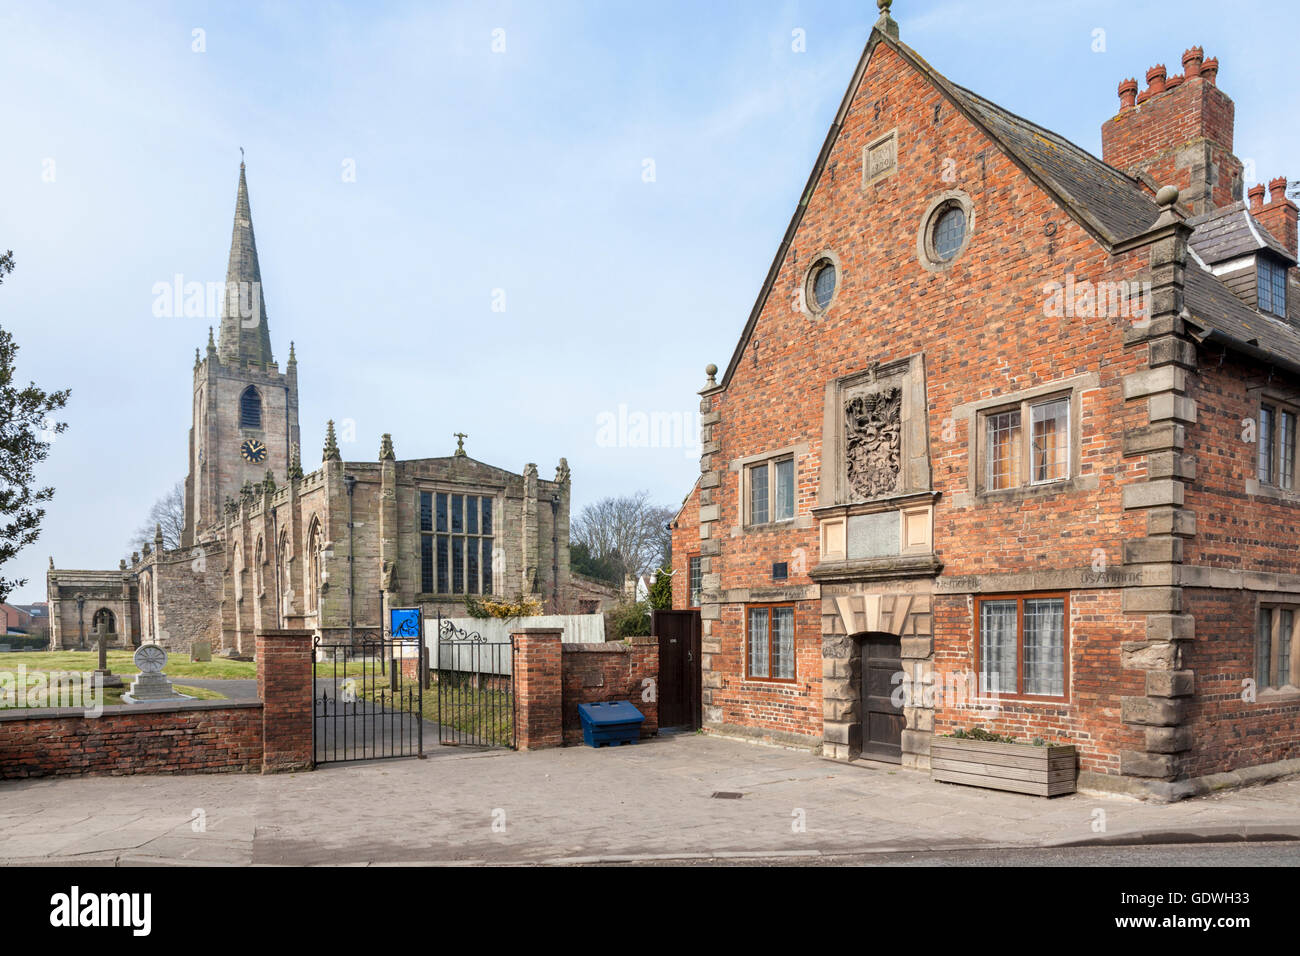 The Alms House and St Mary the Virgin church in the village of Bunny, Nottinghamshire, England, UK Stock Photo